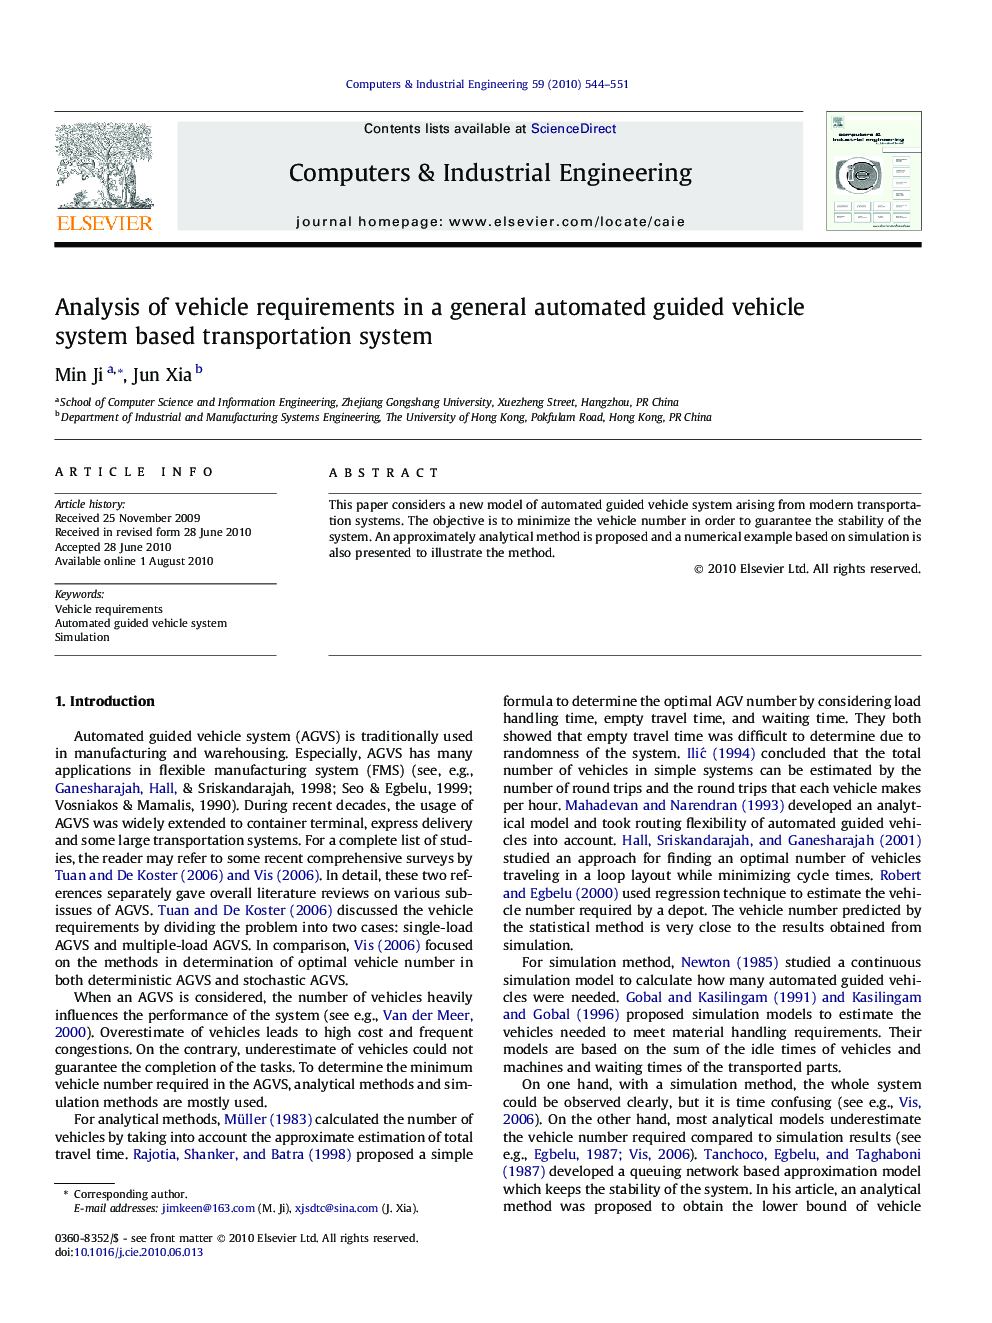 Analysis of vehicle requirements in a general automated guided vehicle system based transportation system